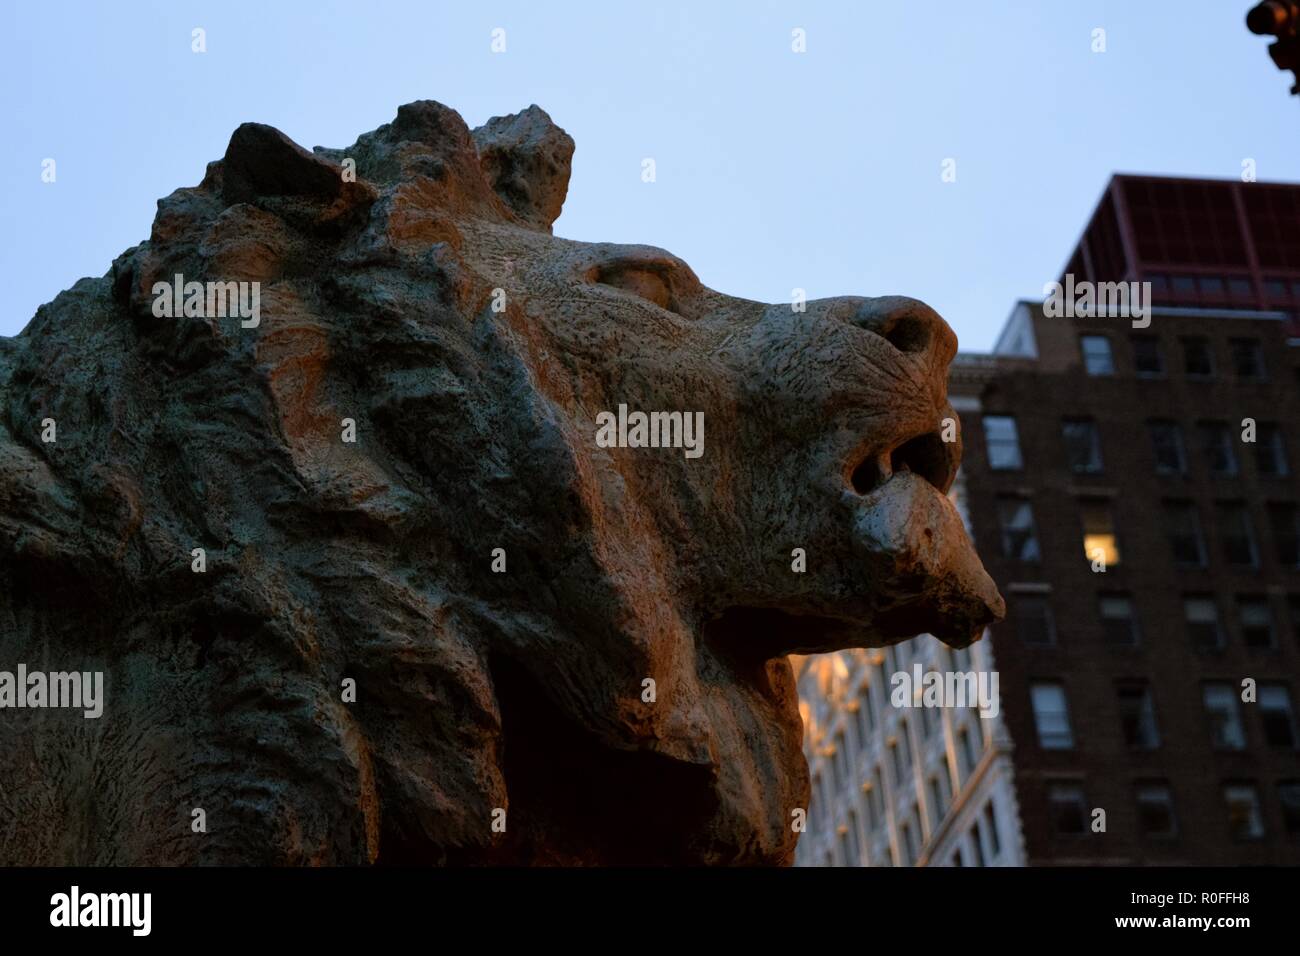 One of two Lions at the entrance of the Art Institute of Chicago. Established in 1893, the museum is one of the oldest and largest in the USA. Stock Photo